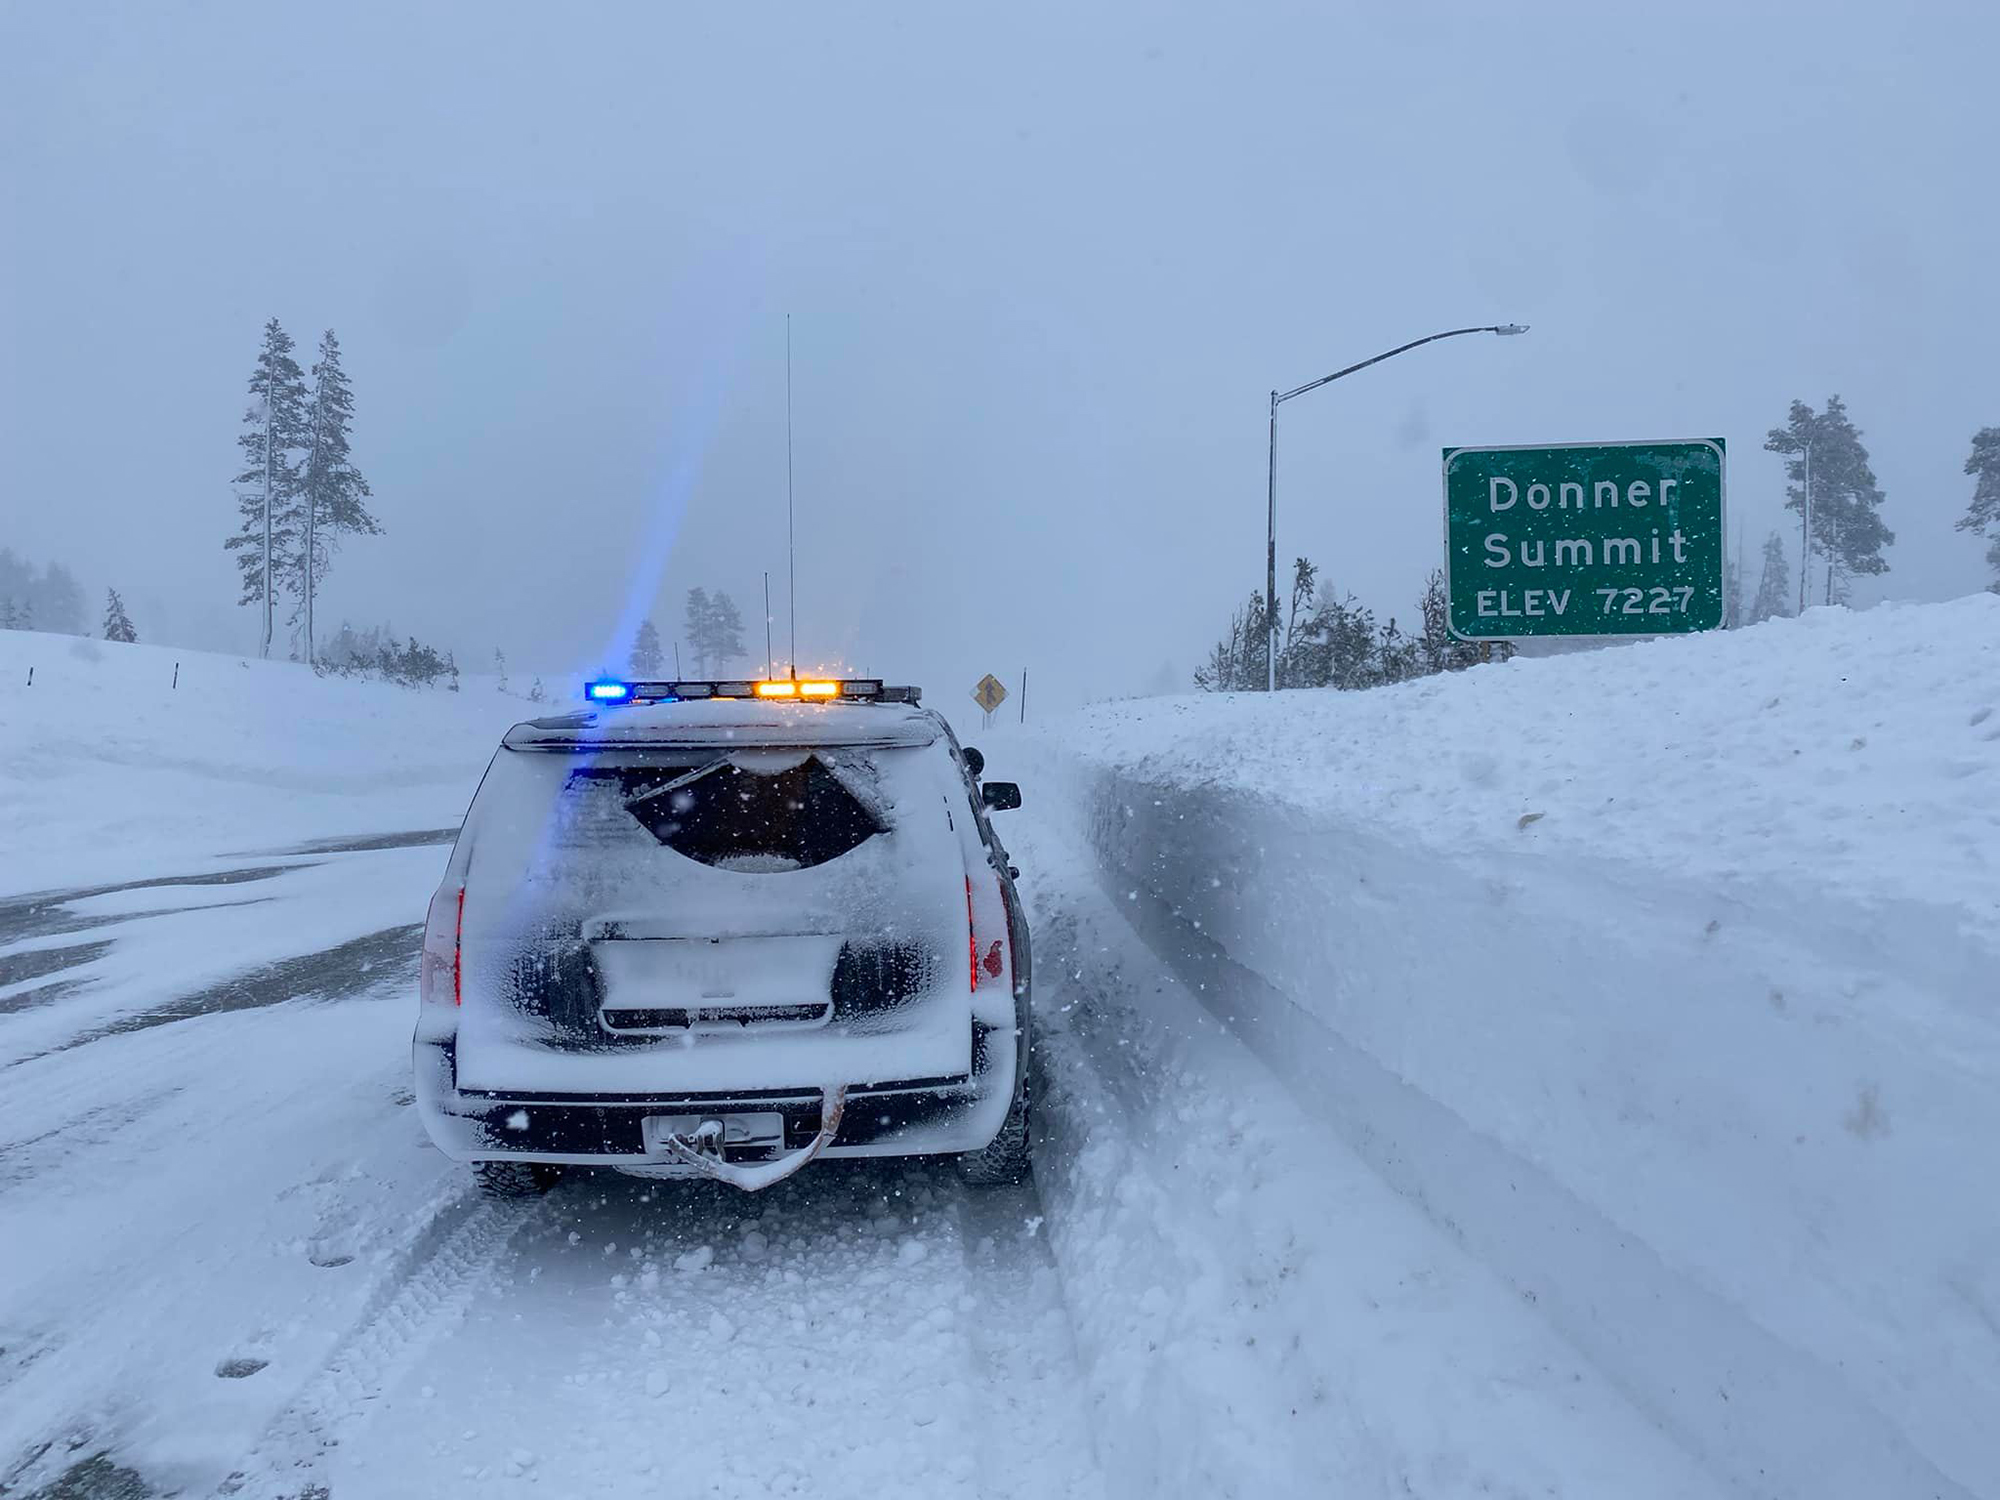 blizzard warning extended, roads impassable as tahoe tries to dig out